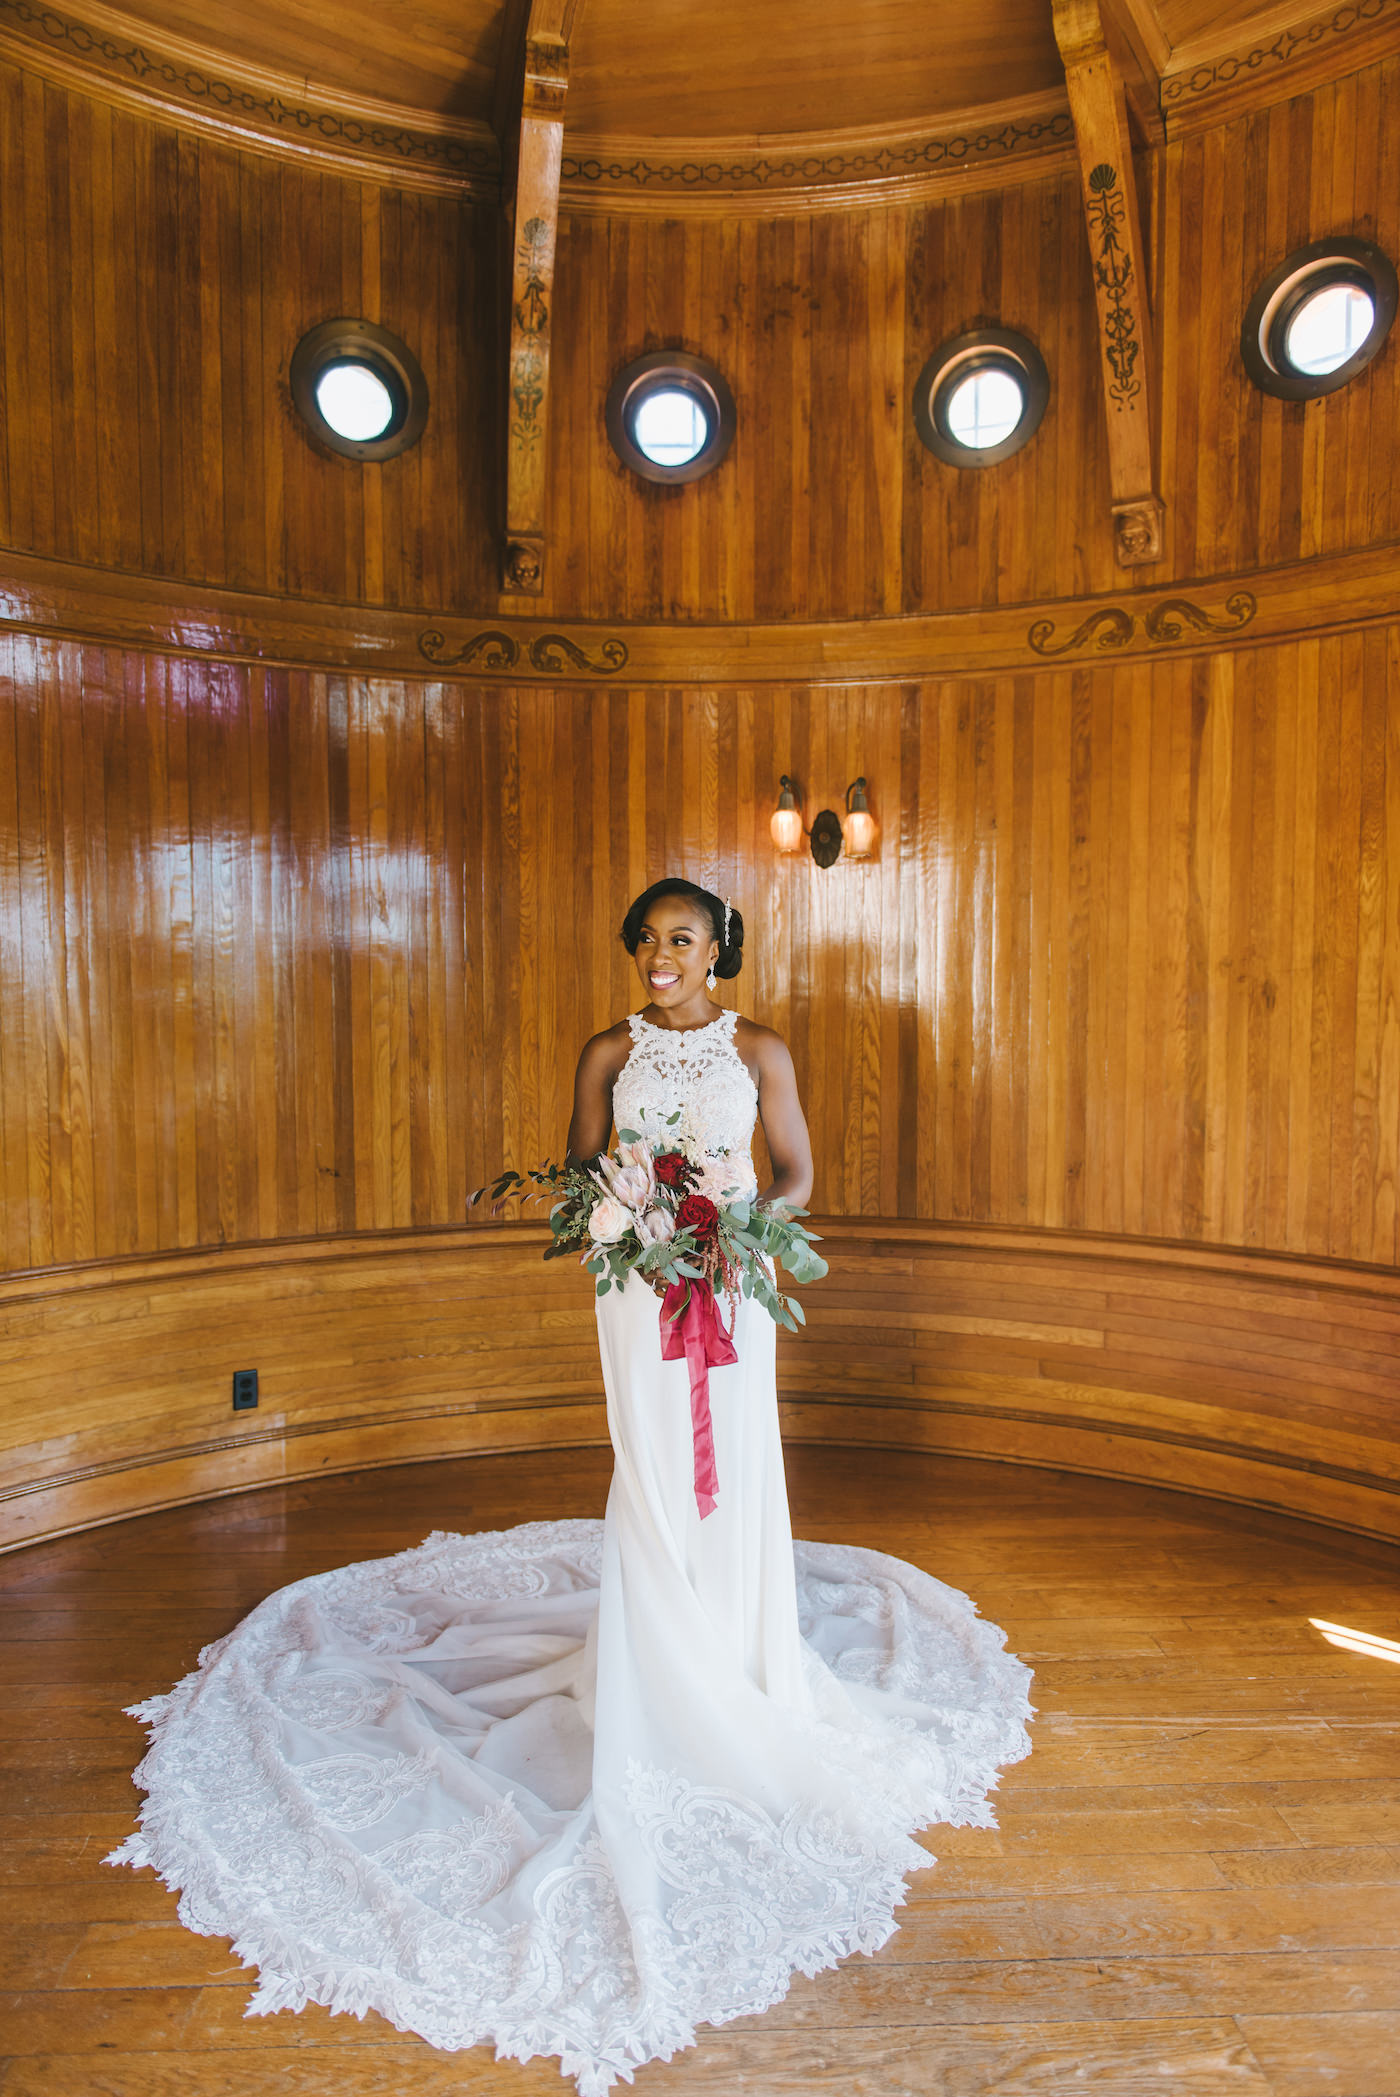 Romantic Florida Bride Holding Luxurious Bridal Bouquet, Bride Wearing Form Fitting Lace Wedding Dress, Holding Red, Pink, Ivory and White Floral Bouquet with Burgundy Ribbon, Inside Historic Powel Crosley Estate in Sarasota | Florida Wedding Photographer Kera Photography